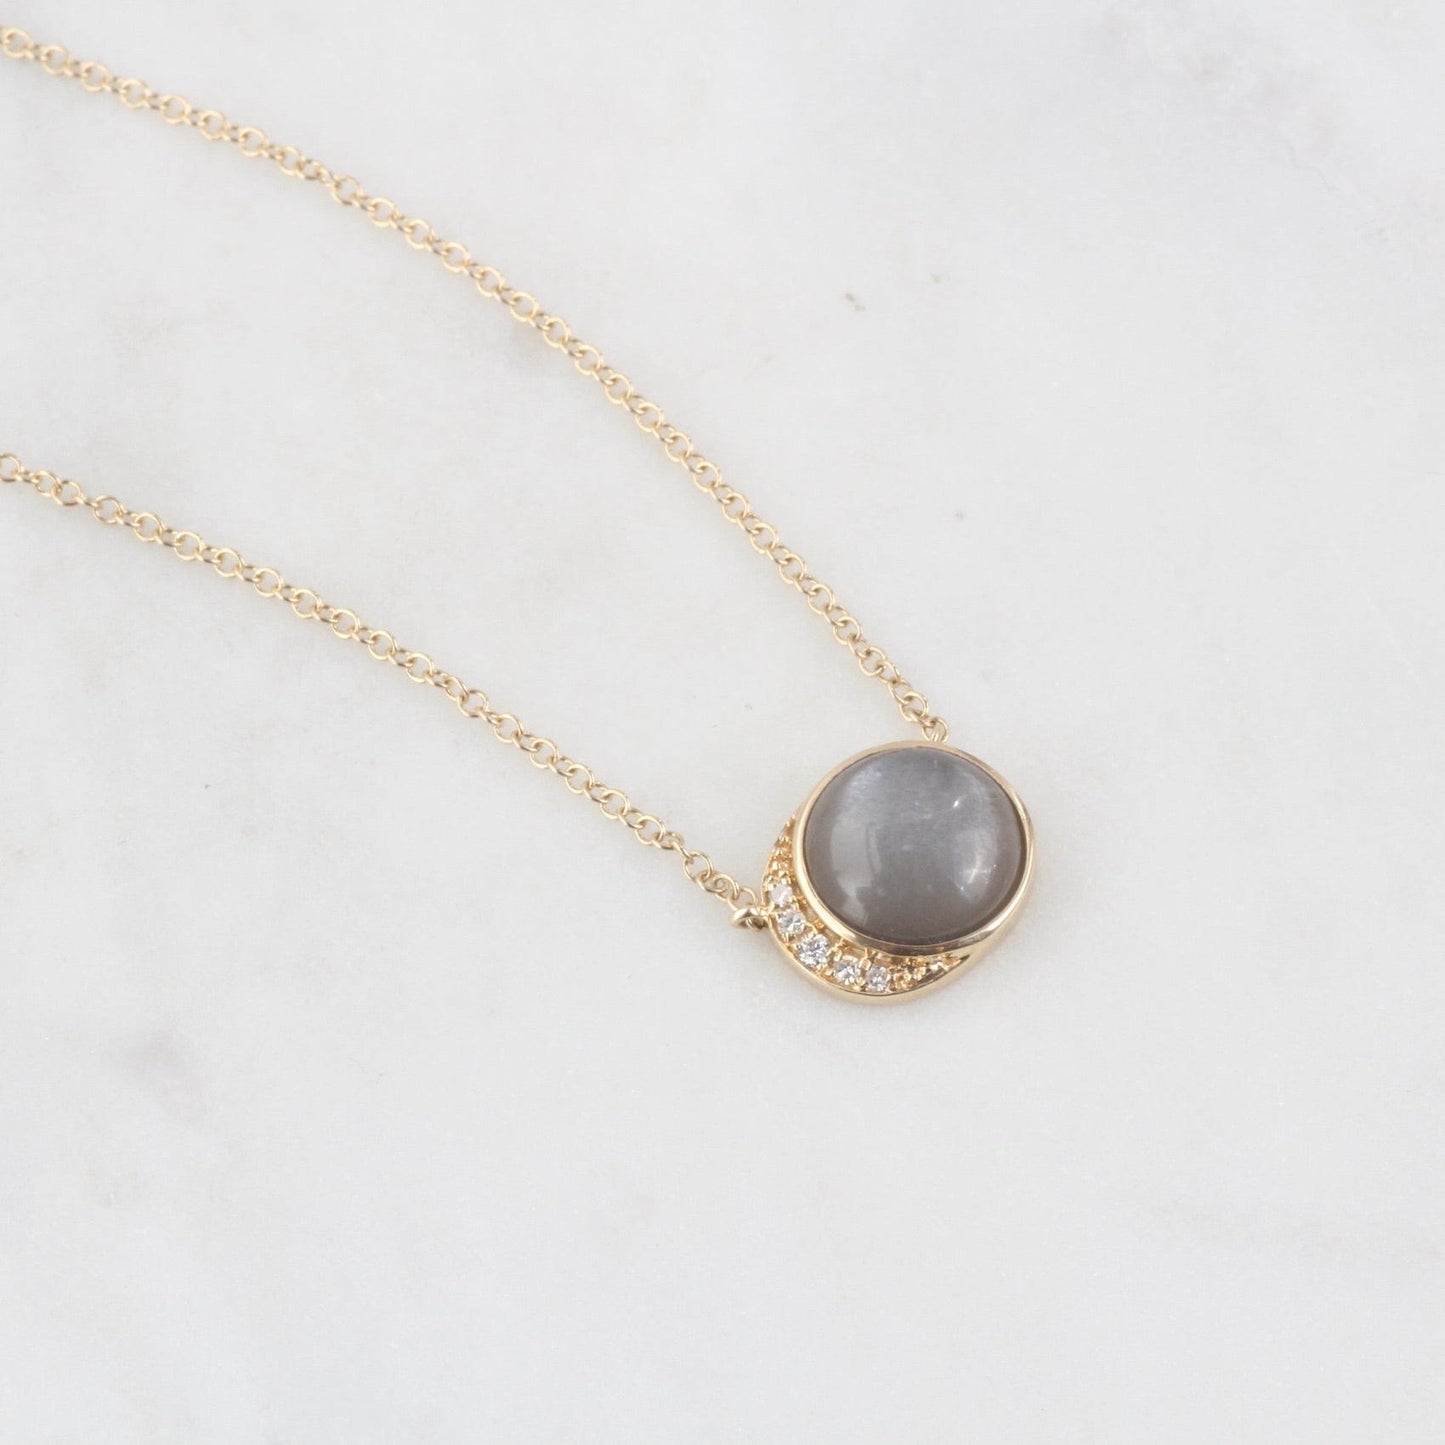 NKL-14K 14k Yellow Gold Moon Phase Necklace with Bezel Set Grey Moonstone